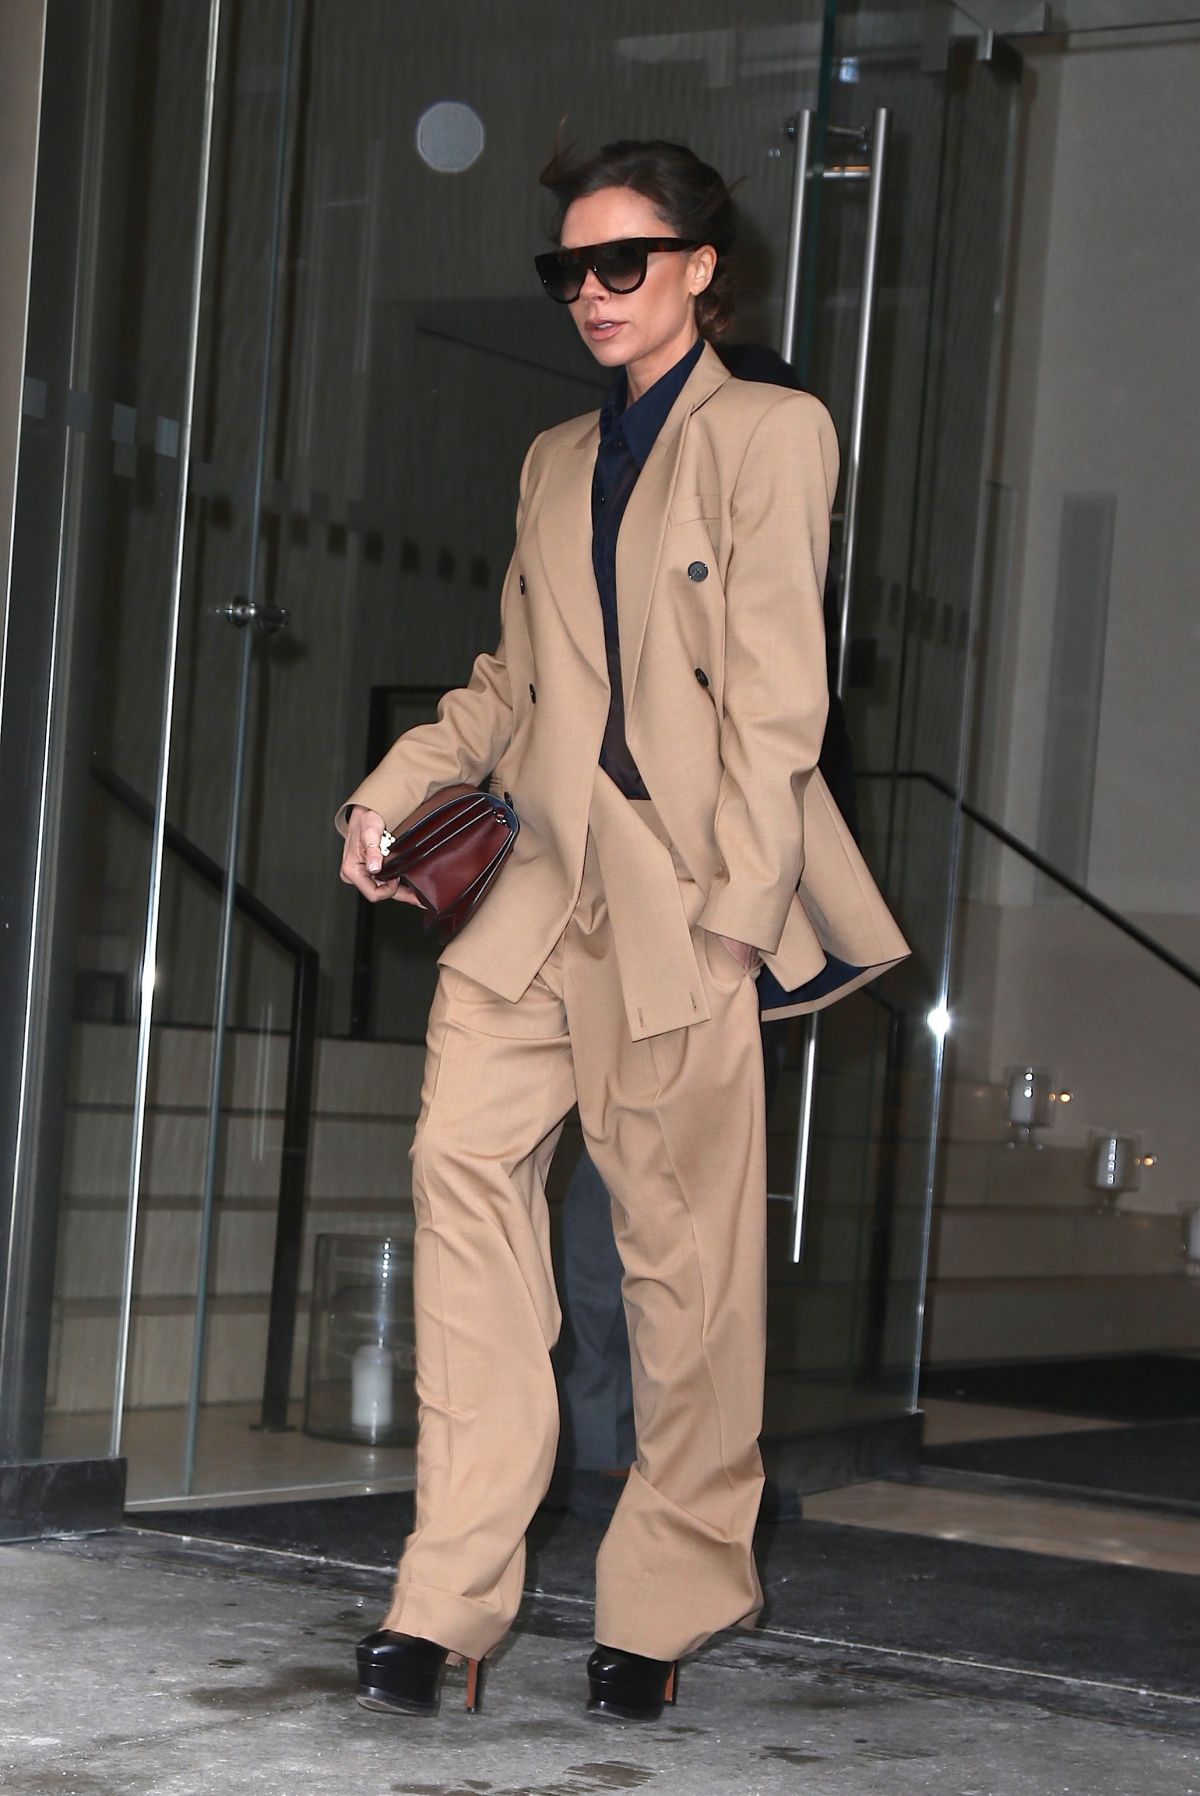 VICTORIA BECKHAM Leaves Her Hotel in New York 03/15/2017 – HawtCelebs